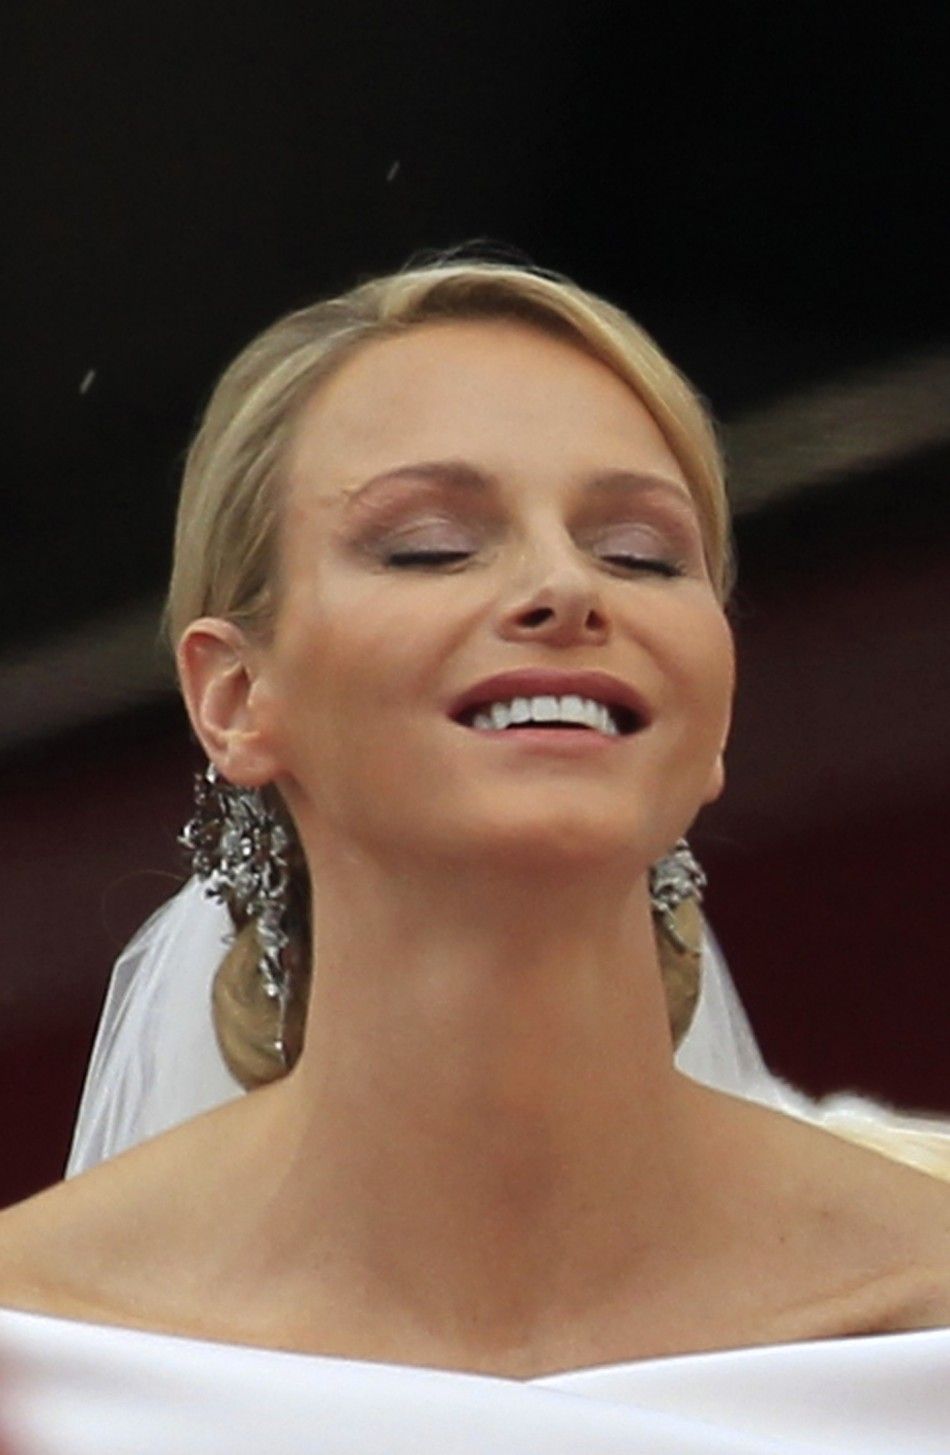 Monacos Princess Charlene, wife of Prince Albert II smiles after the religious wedding ceremony in at the Palace in Monaco